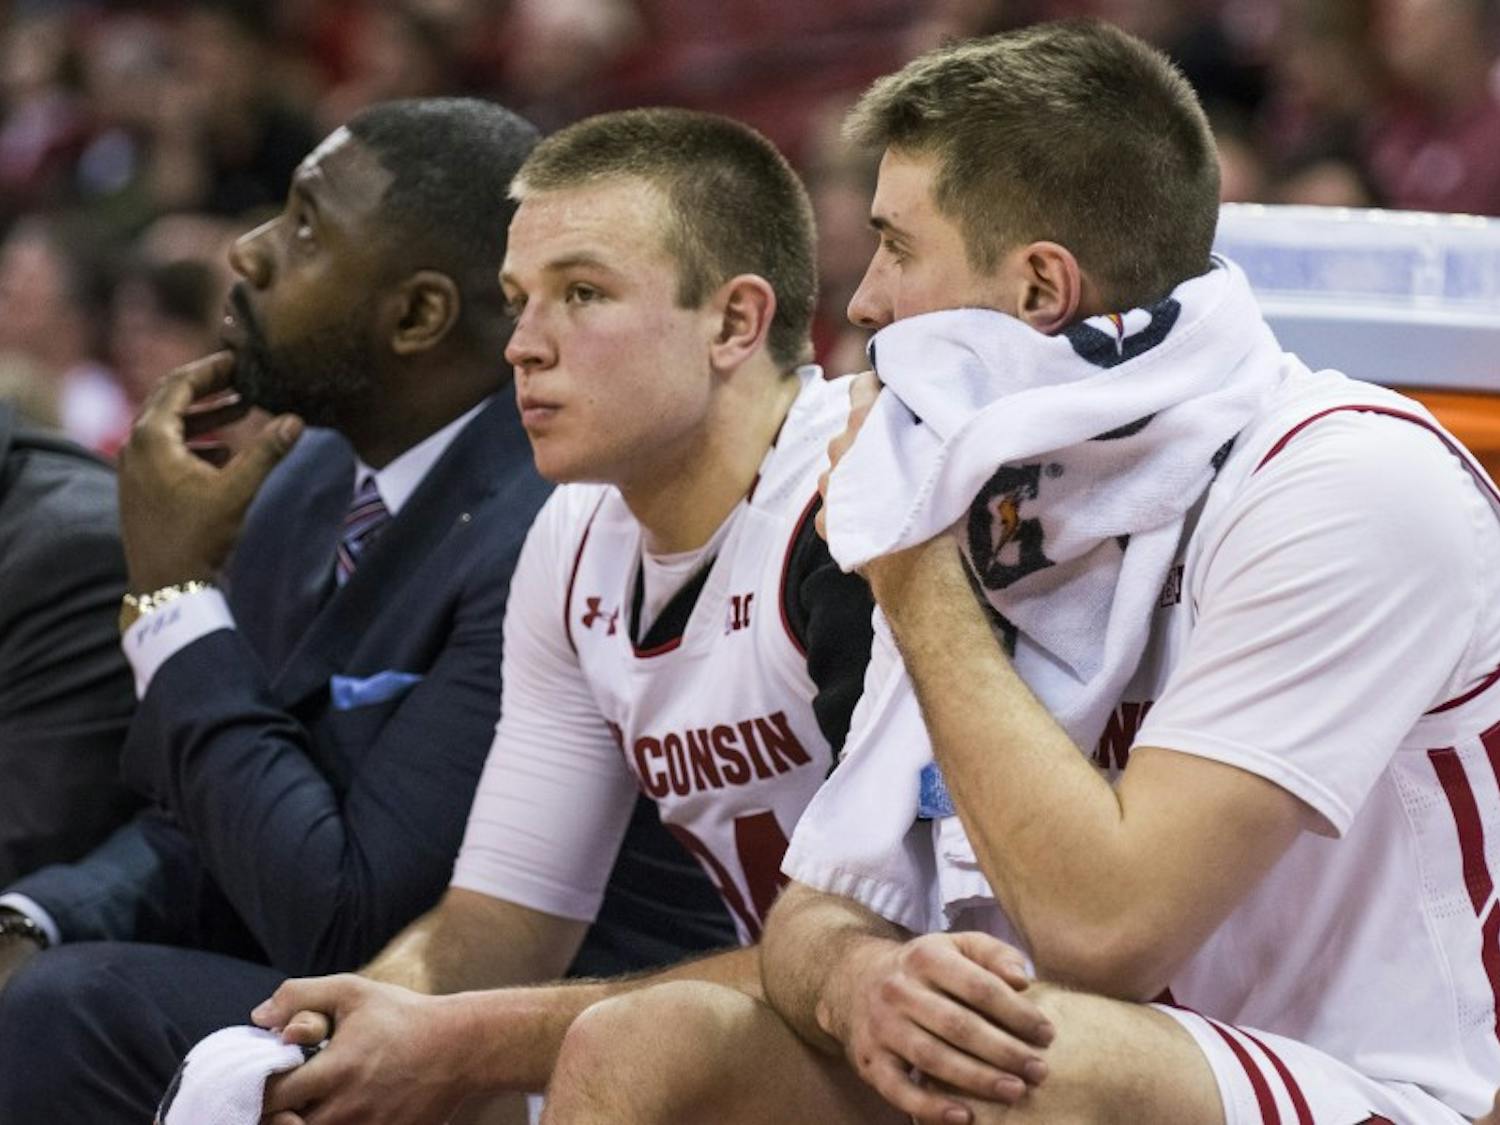 Senior&nbsp;Aaron&nbsp;Moesch and freshman&nbsp;Brad Davison have become close off the court, allowing Moesch to mentor the young Badger and help him develop into a future star.